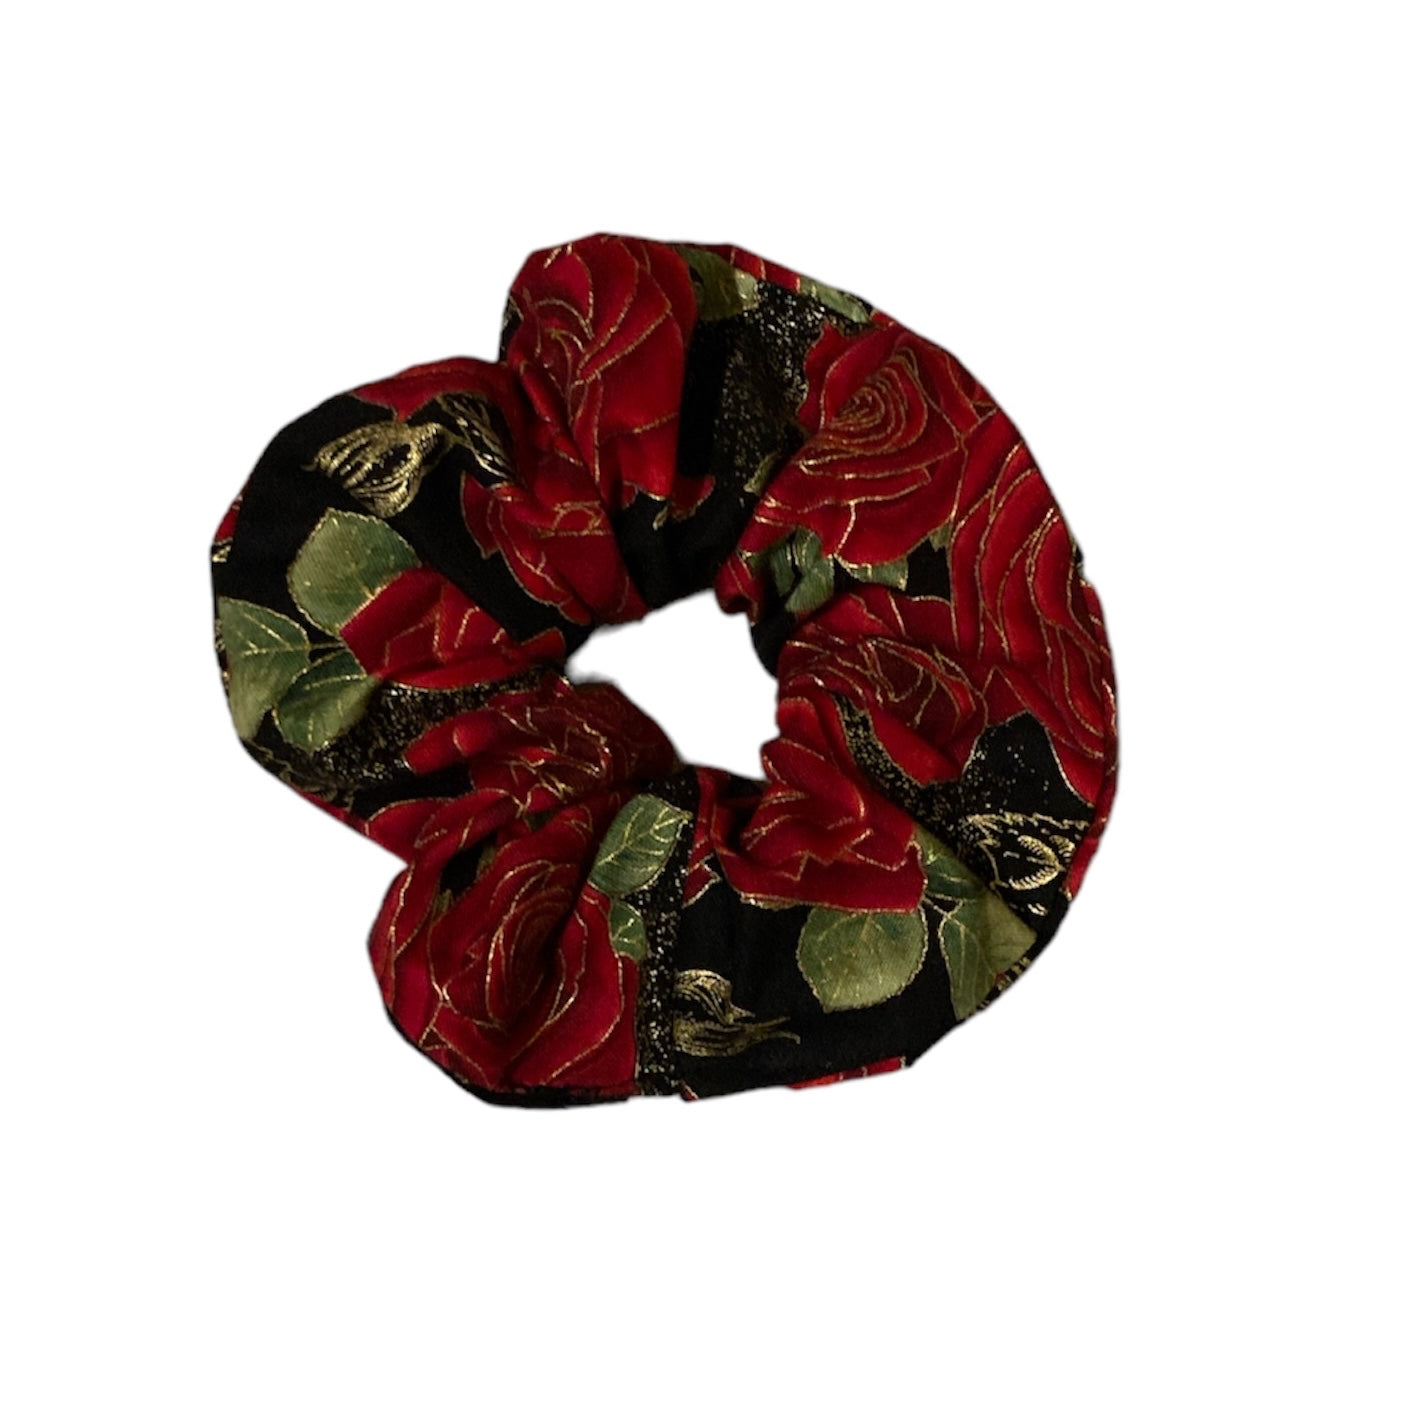 Red rose cotton scrunchies